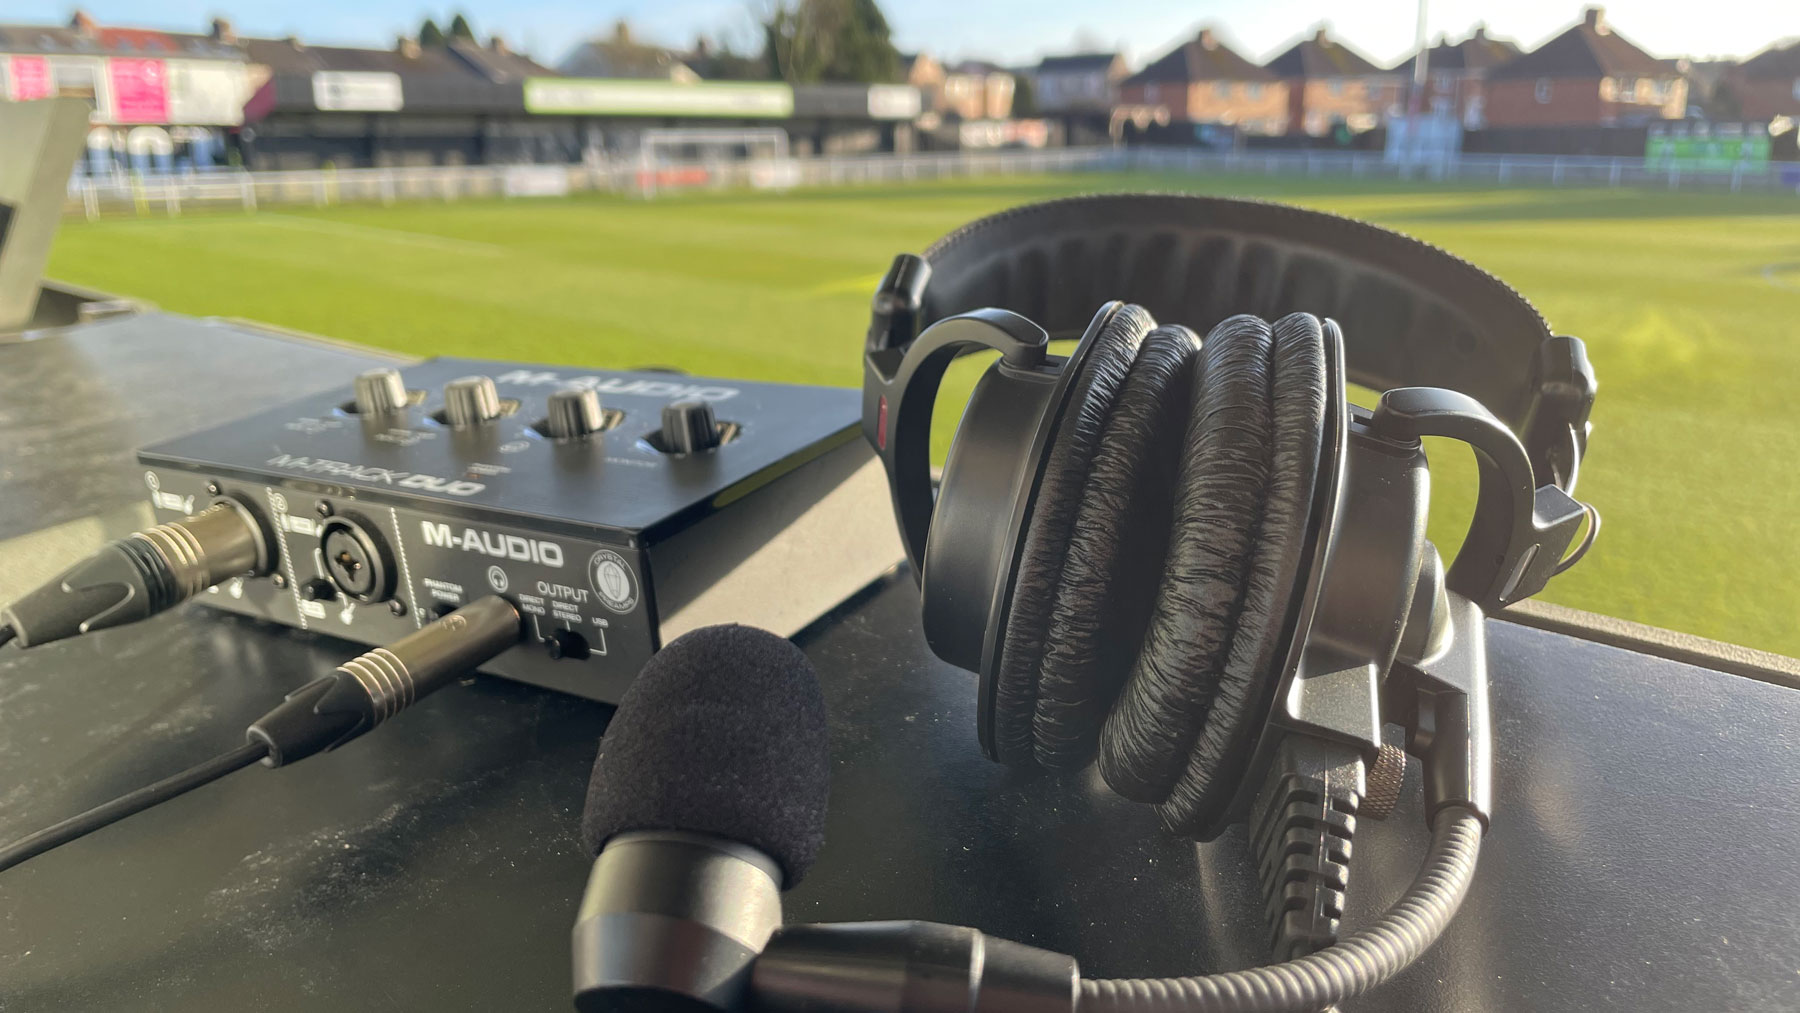 Live commentary on Durham OnAir